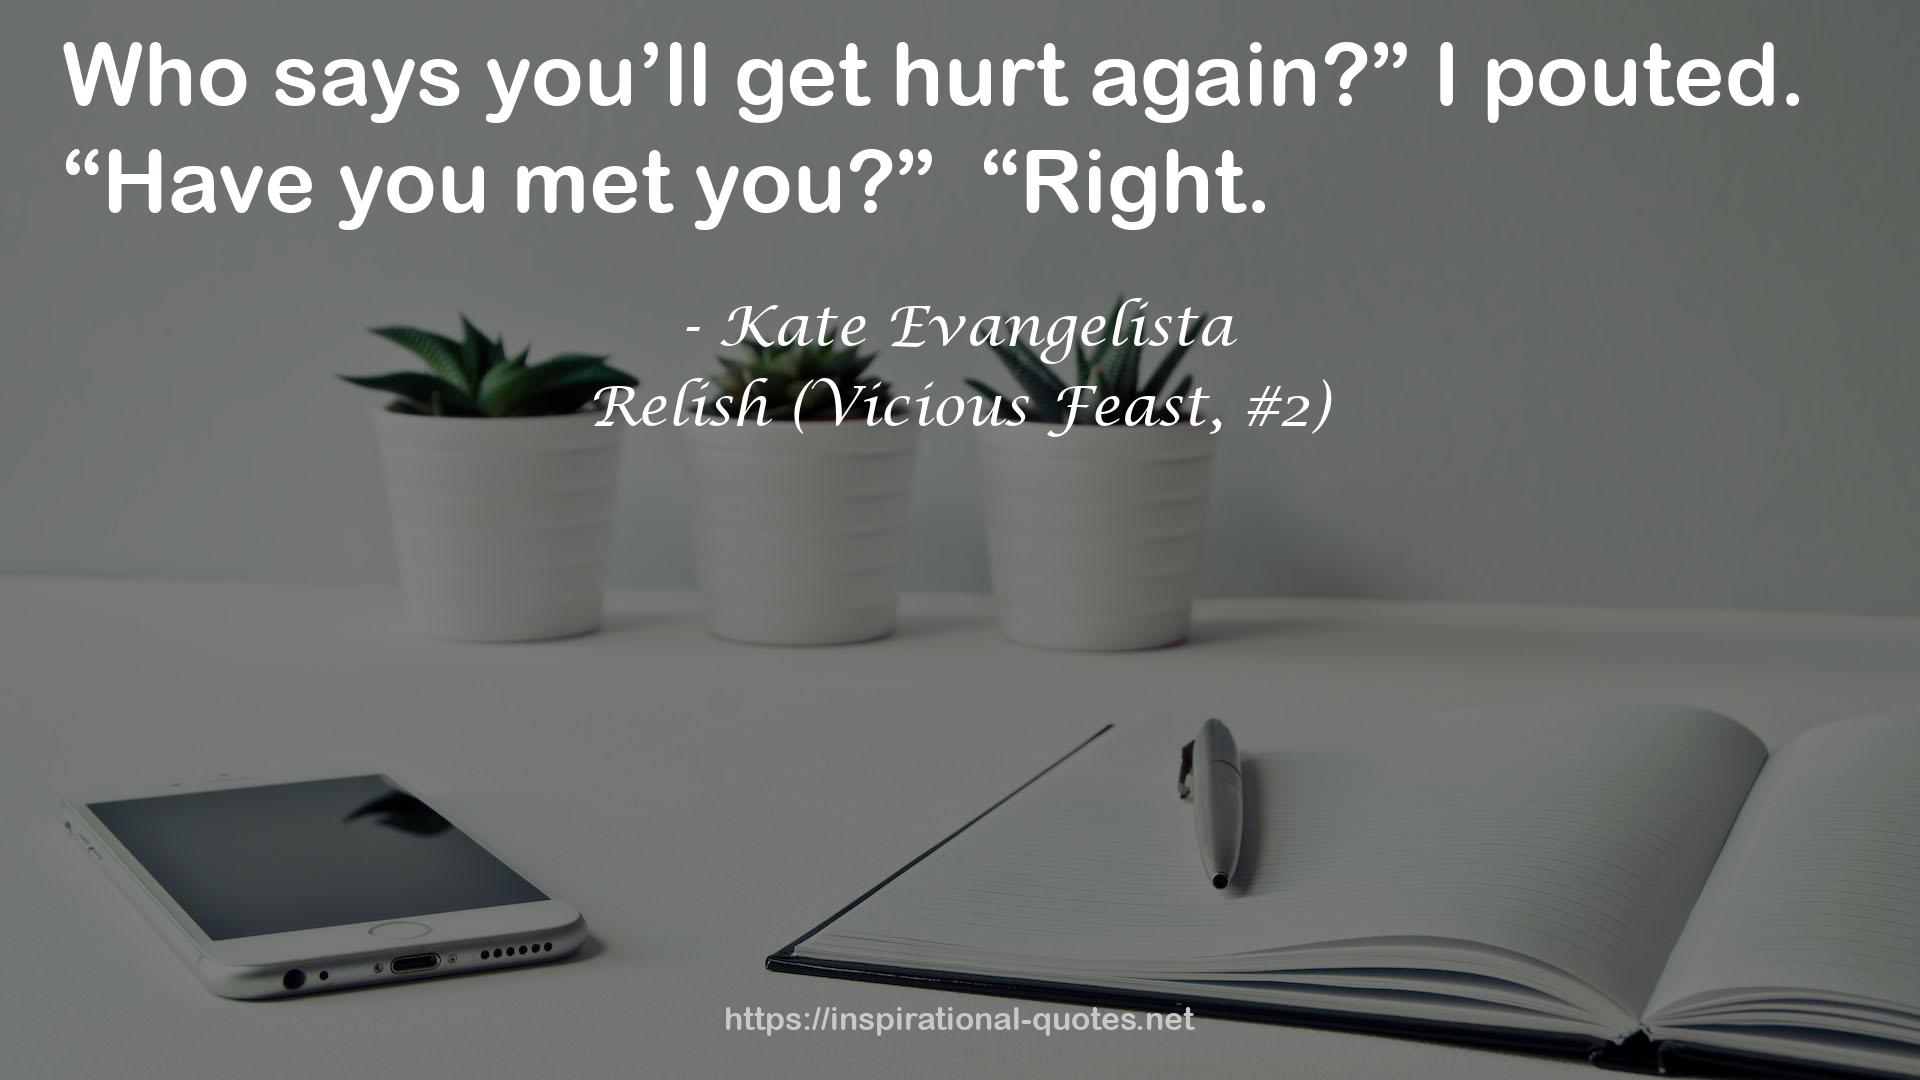 Relish (Vicious Feast, #2) QUOTES